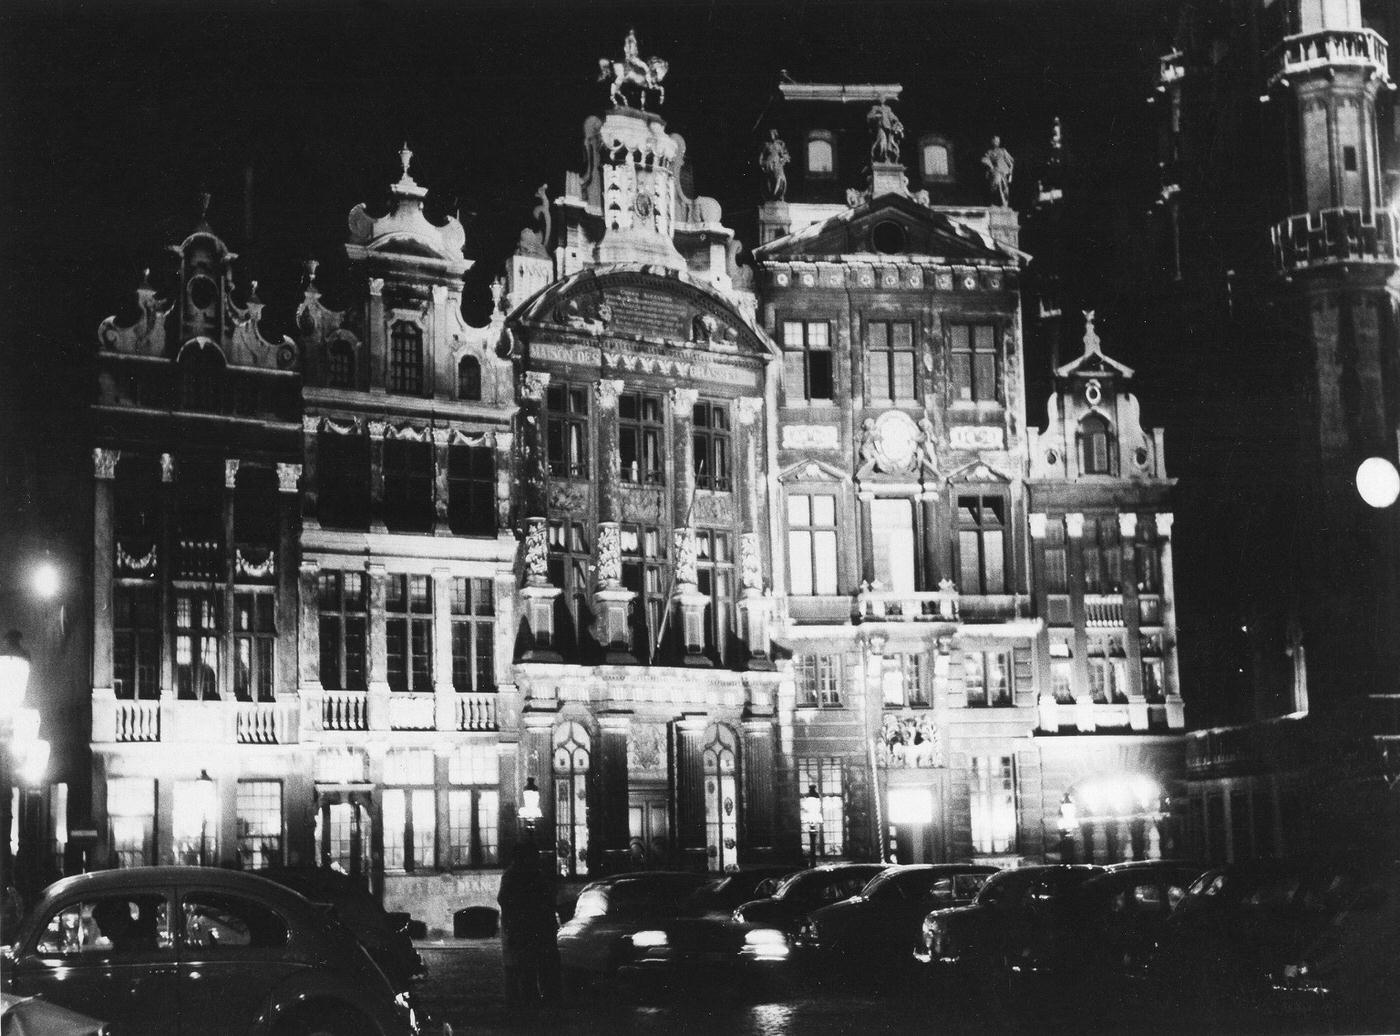 Brussels, Grand Place at night, 1958